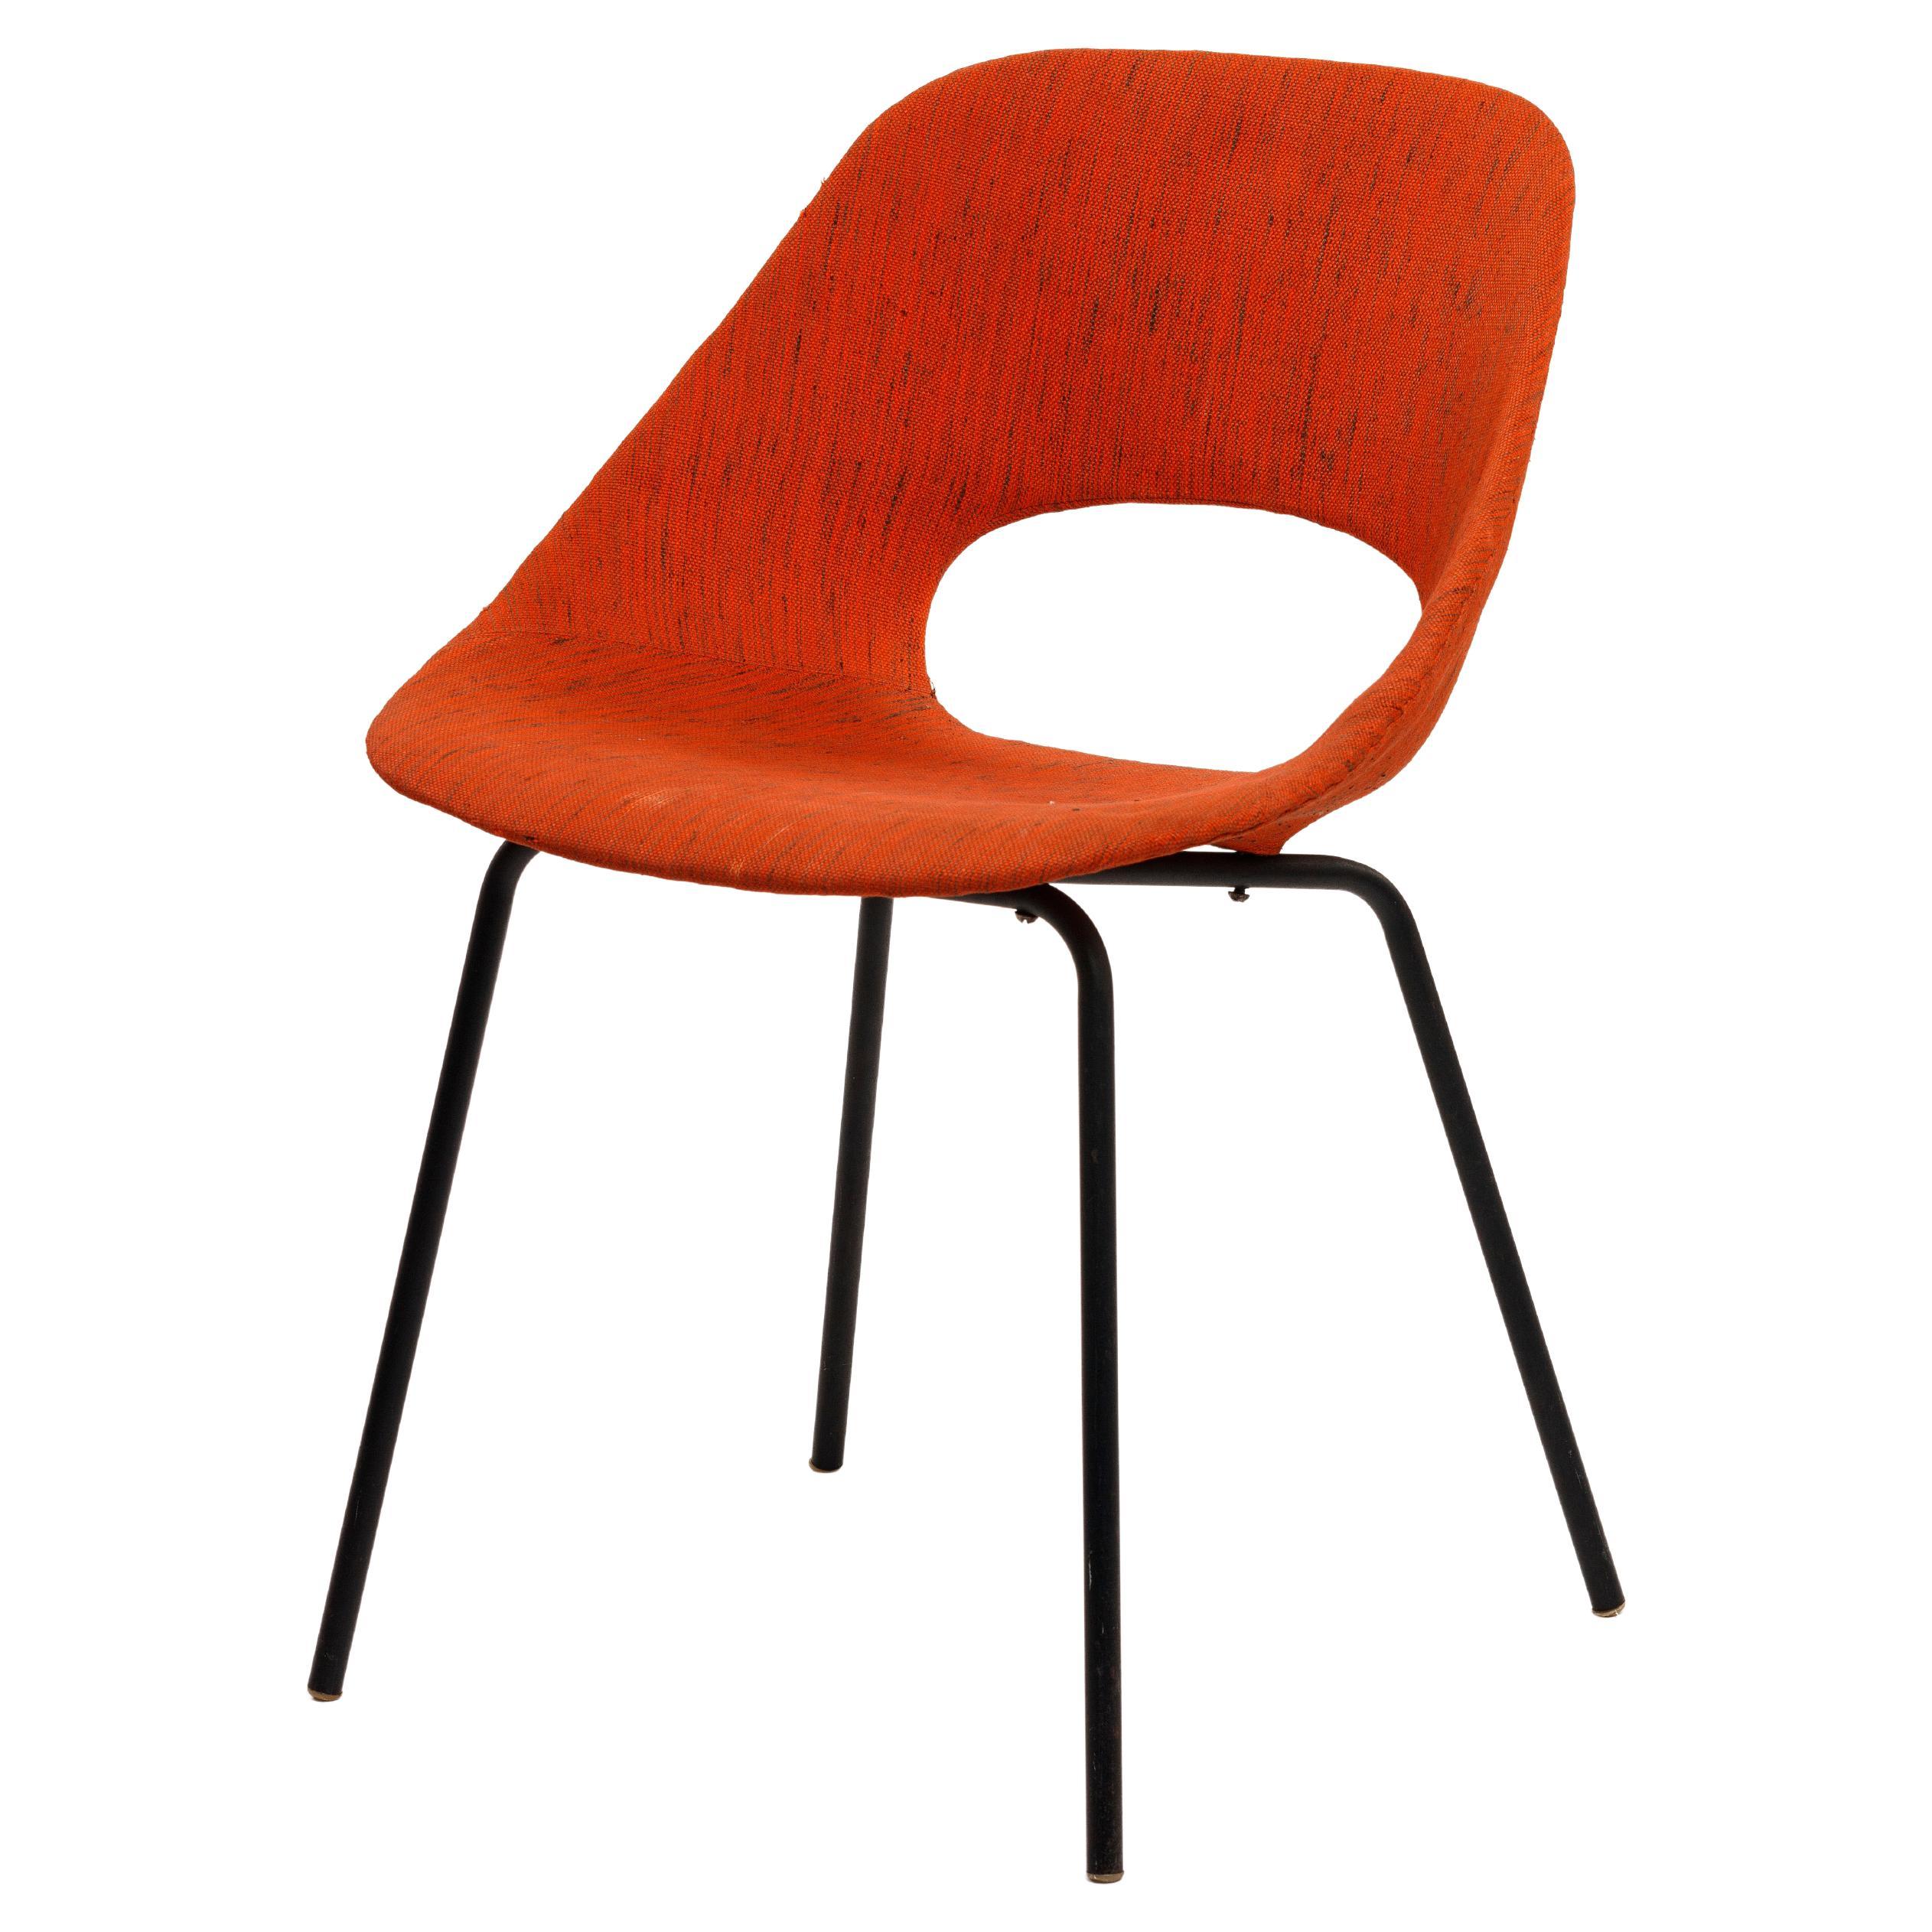 Stunning cast aluminum chair with their original orange fabric, extremely rare chair with their original fabric. 

In 1951 Guariche began to collaborate with Steiner, another major furniture manufacturer. He designed the innovative chair called